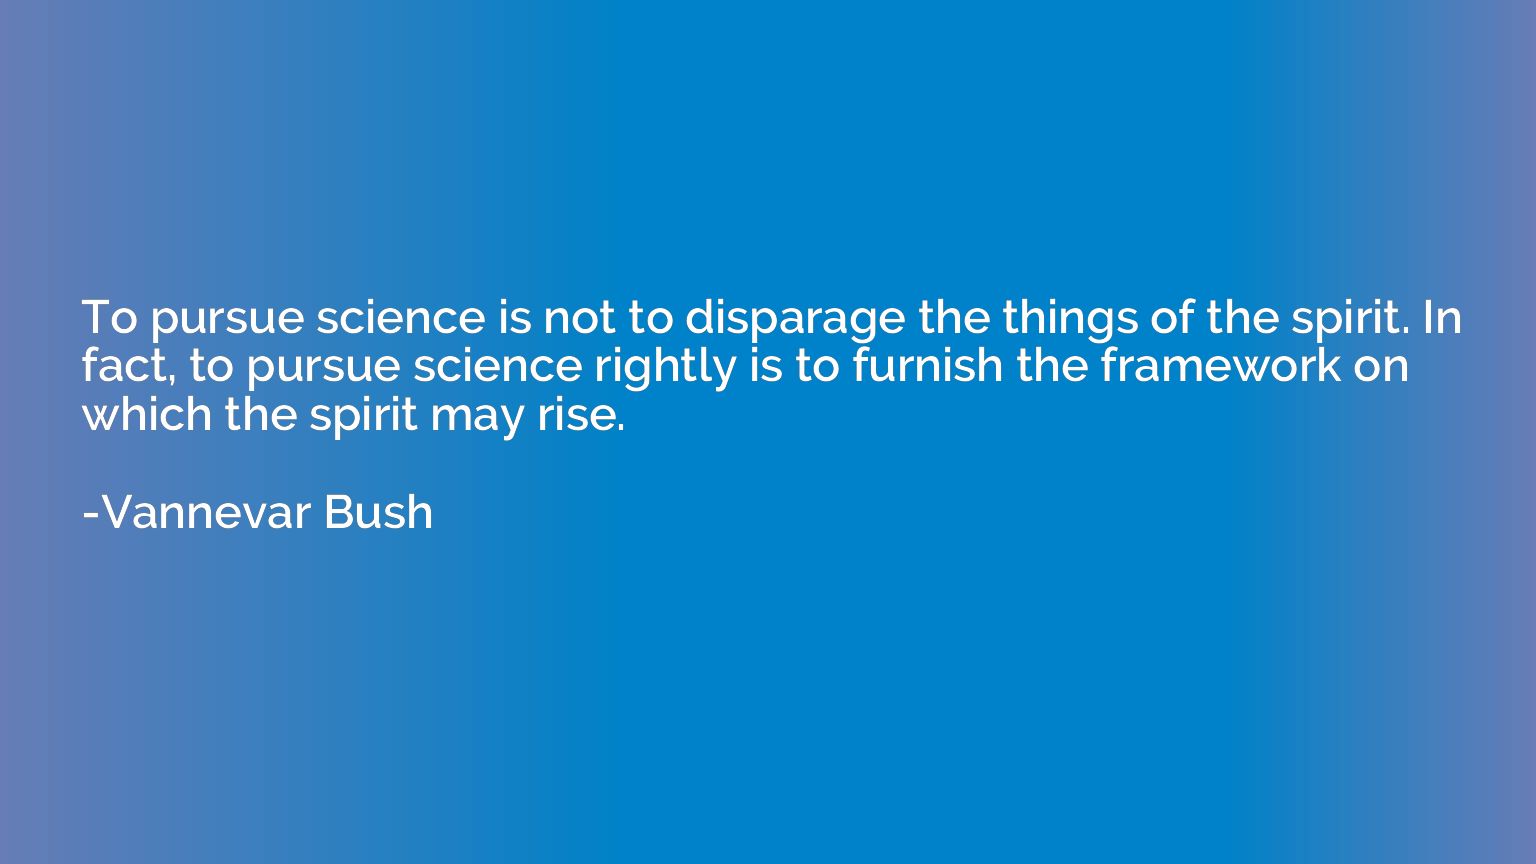 To pursue science is not to disparage the things of the spir